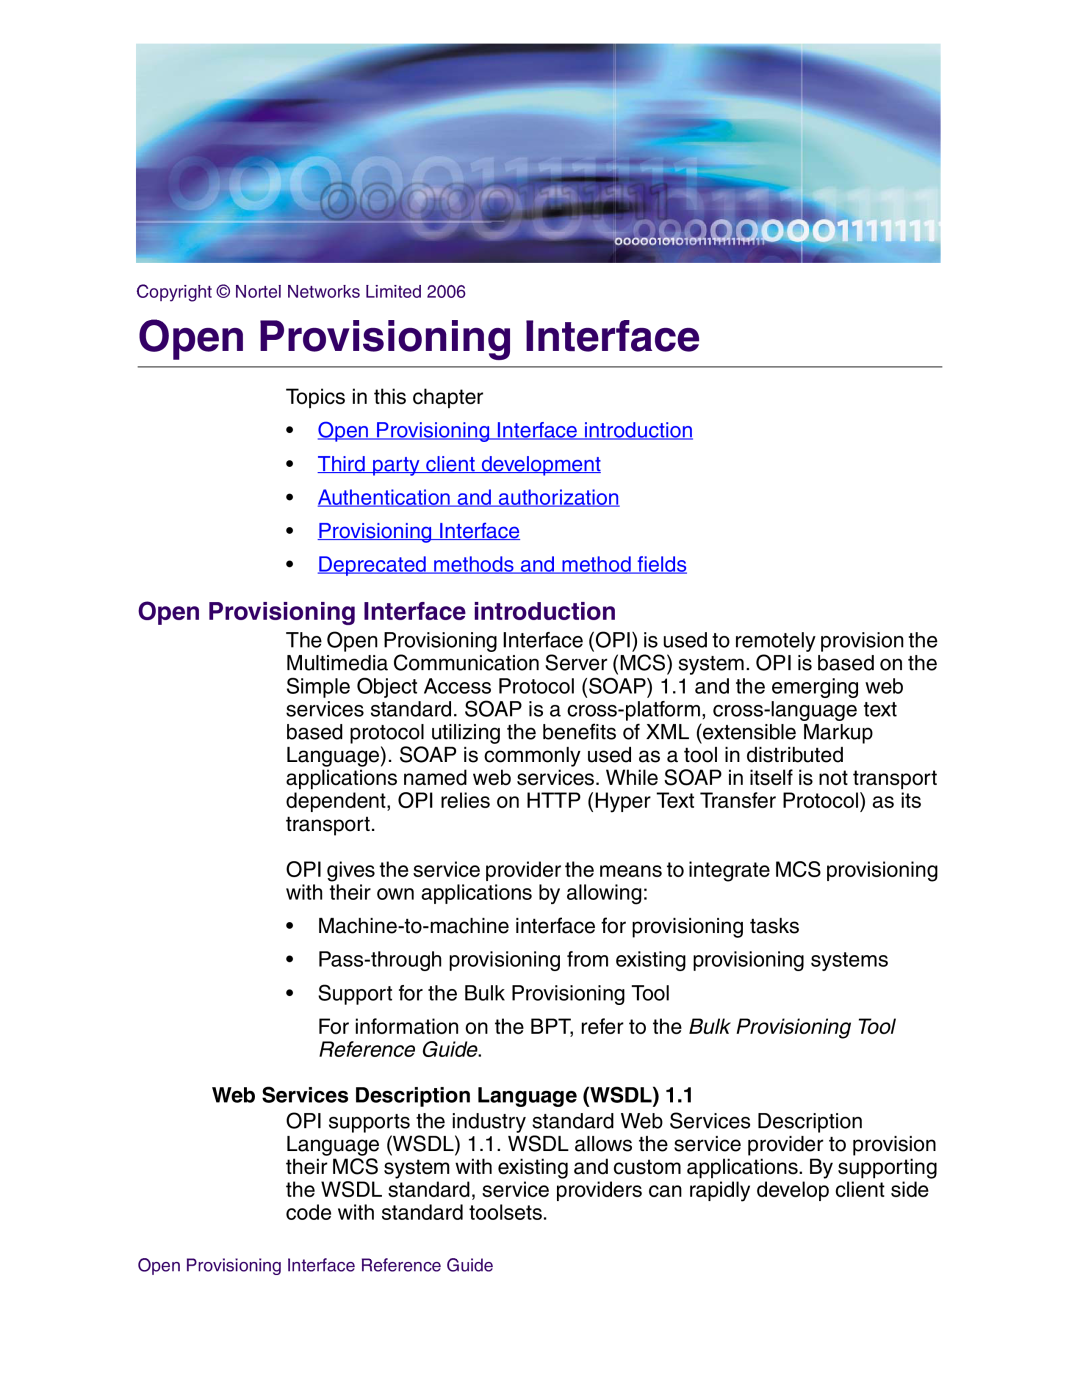 Nortel Networks NN42020-123 manual Open Provisioning Interface introduction, Web Services Description Language WSDL 